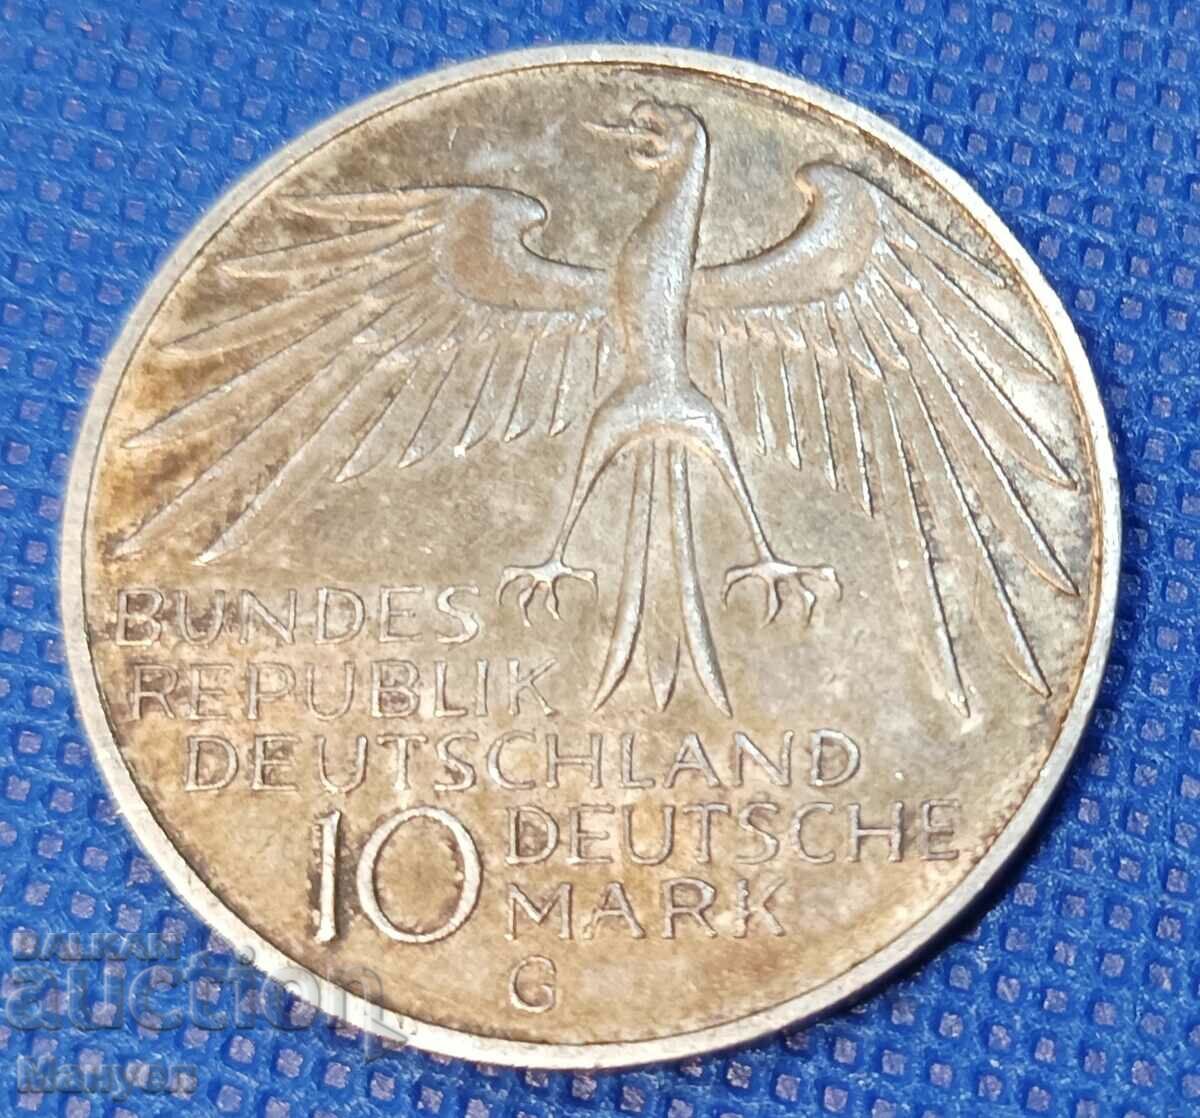 10 silver marks 1972